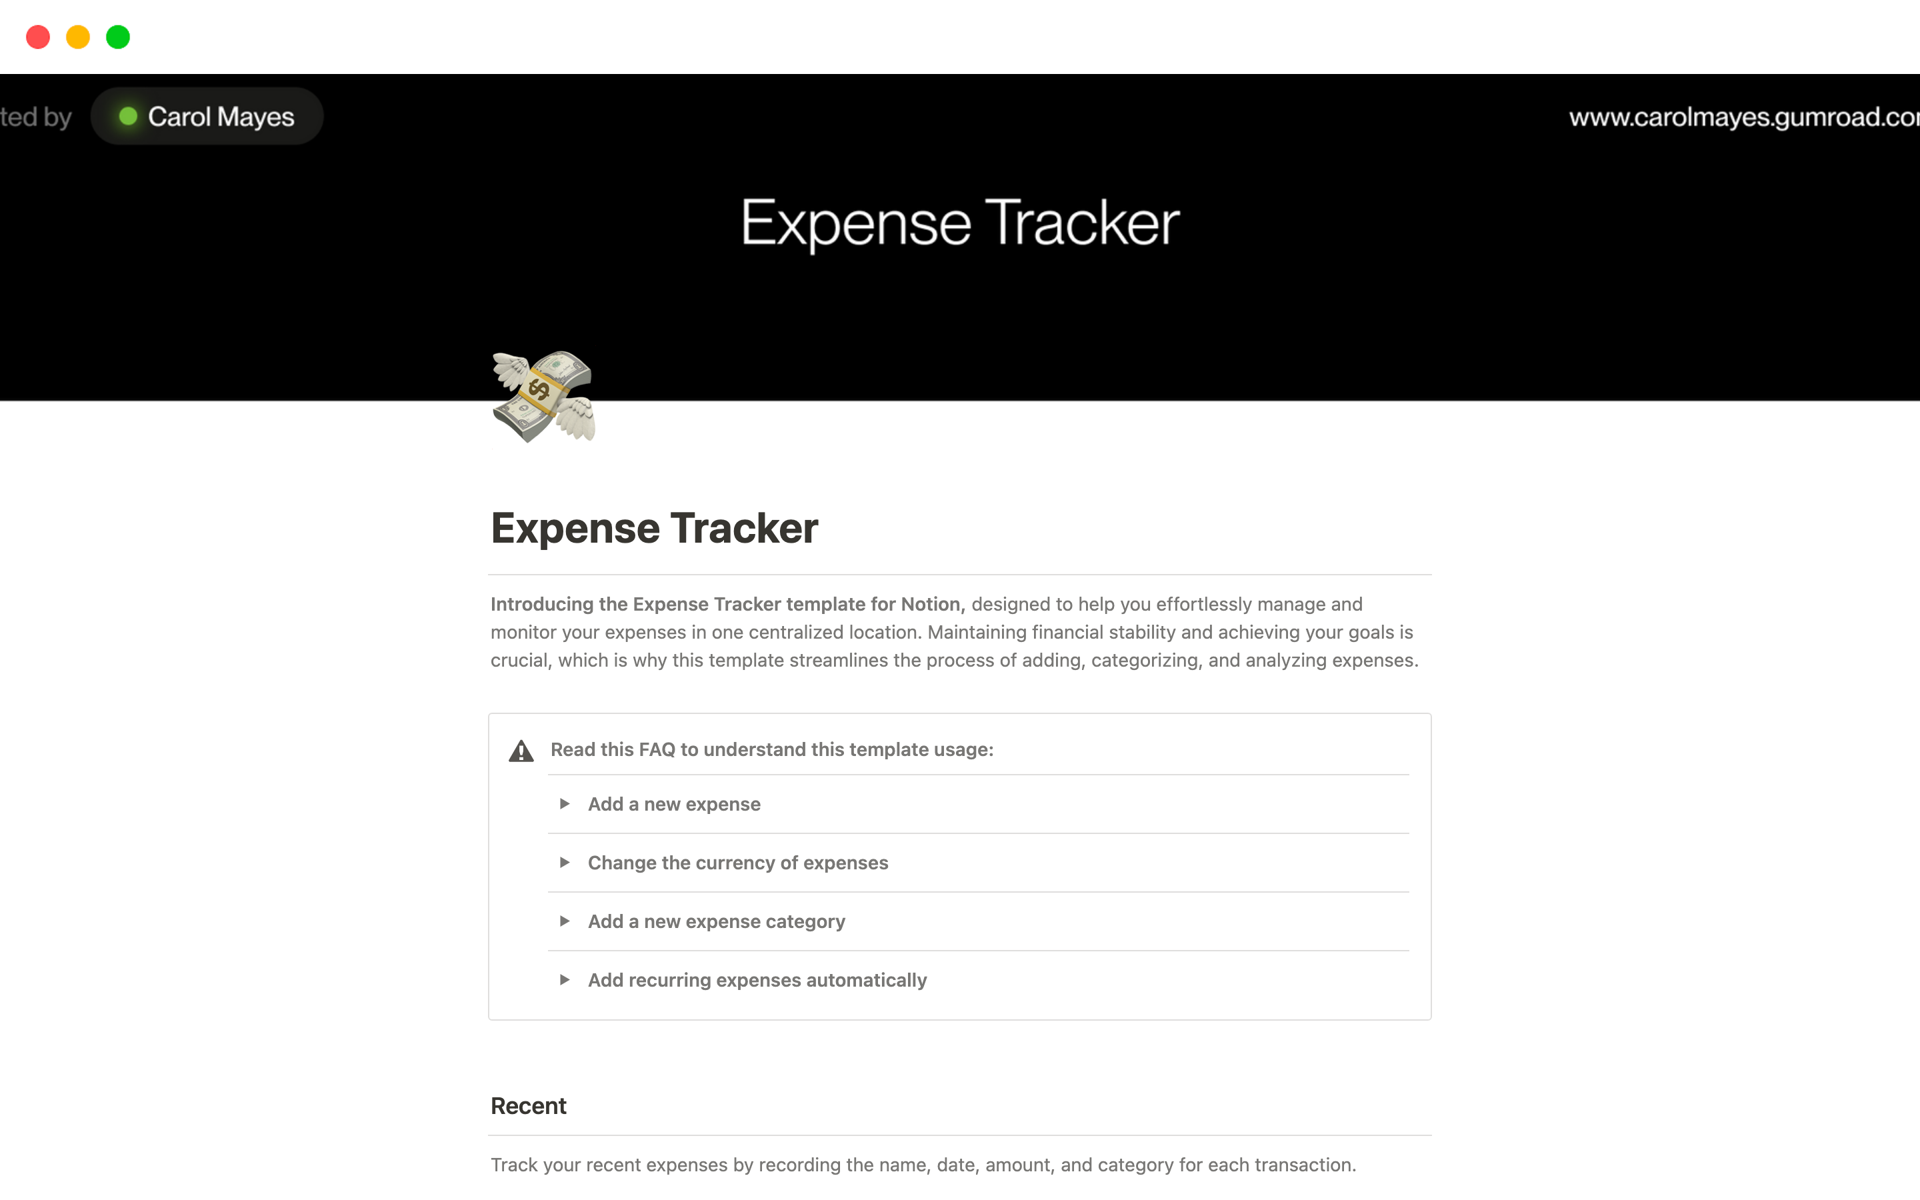 The Expense Tracker Template for Notion has everything you need to easily track your expenses, stay organized, and gain financial clarity!